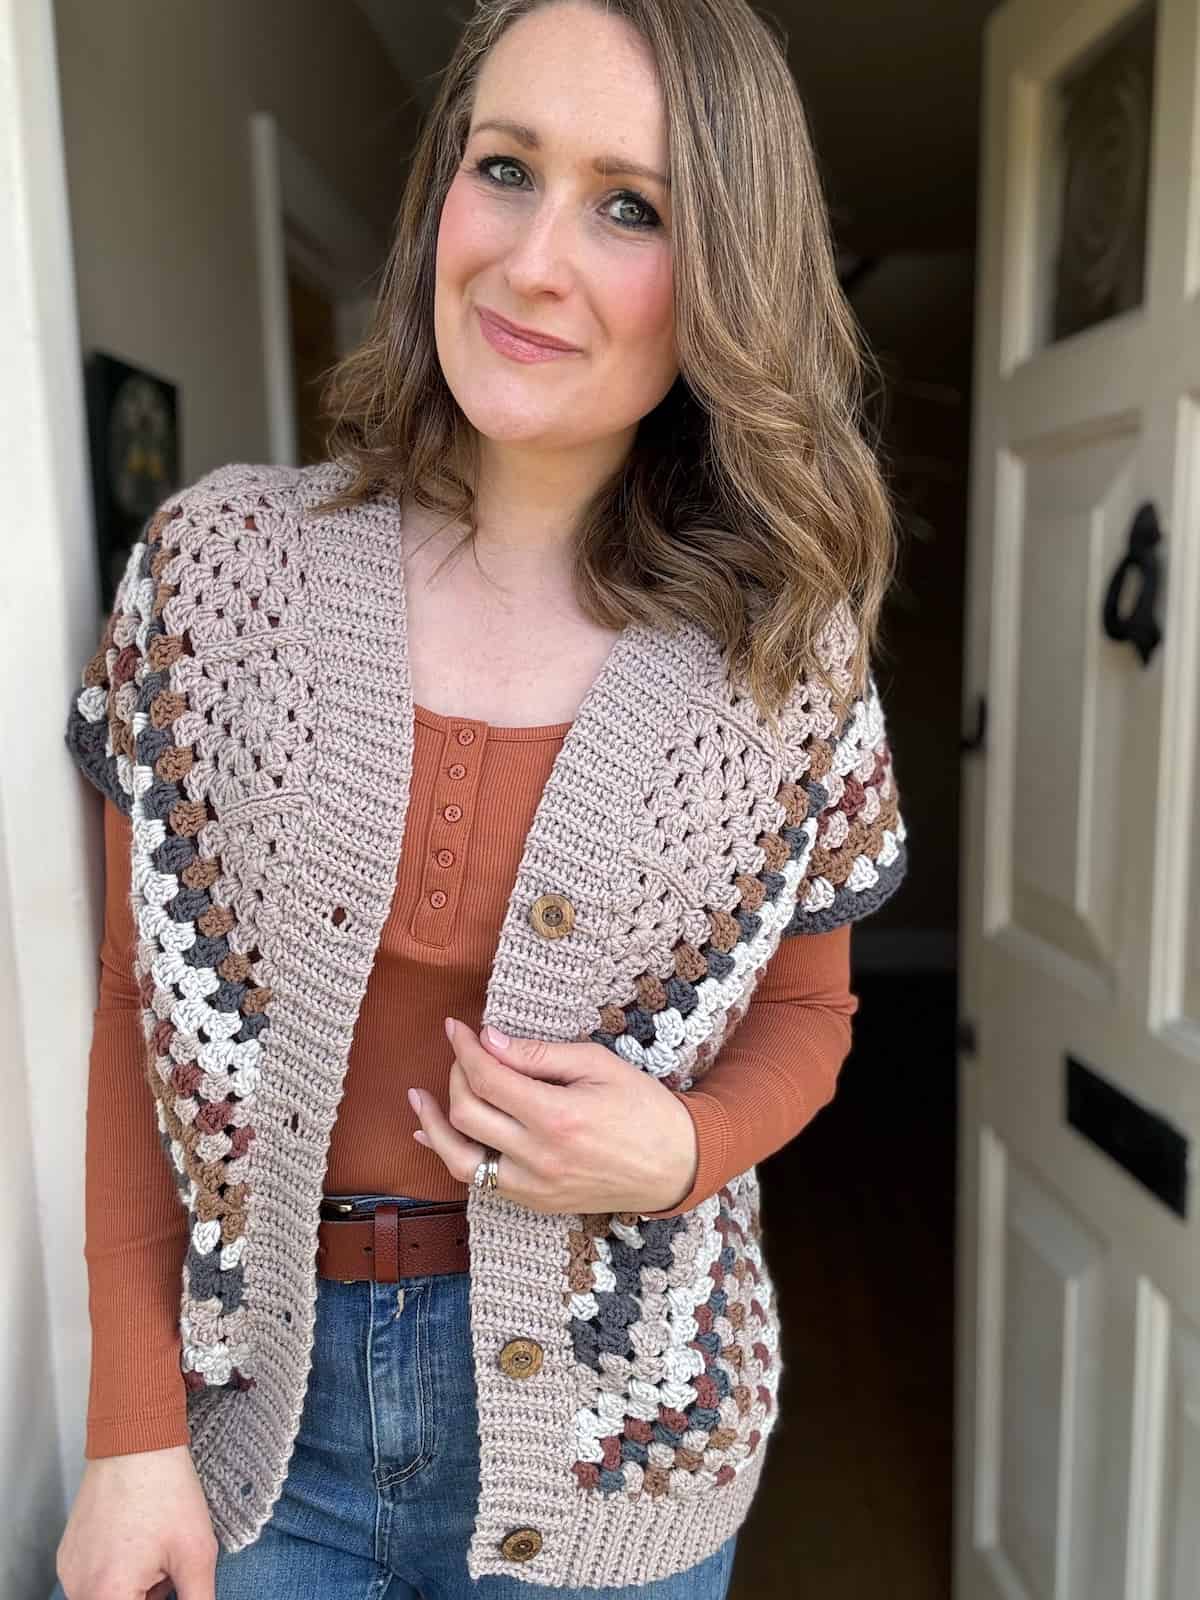 Woman smiling in a handmade granny square crochet cardigan standing indoors.